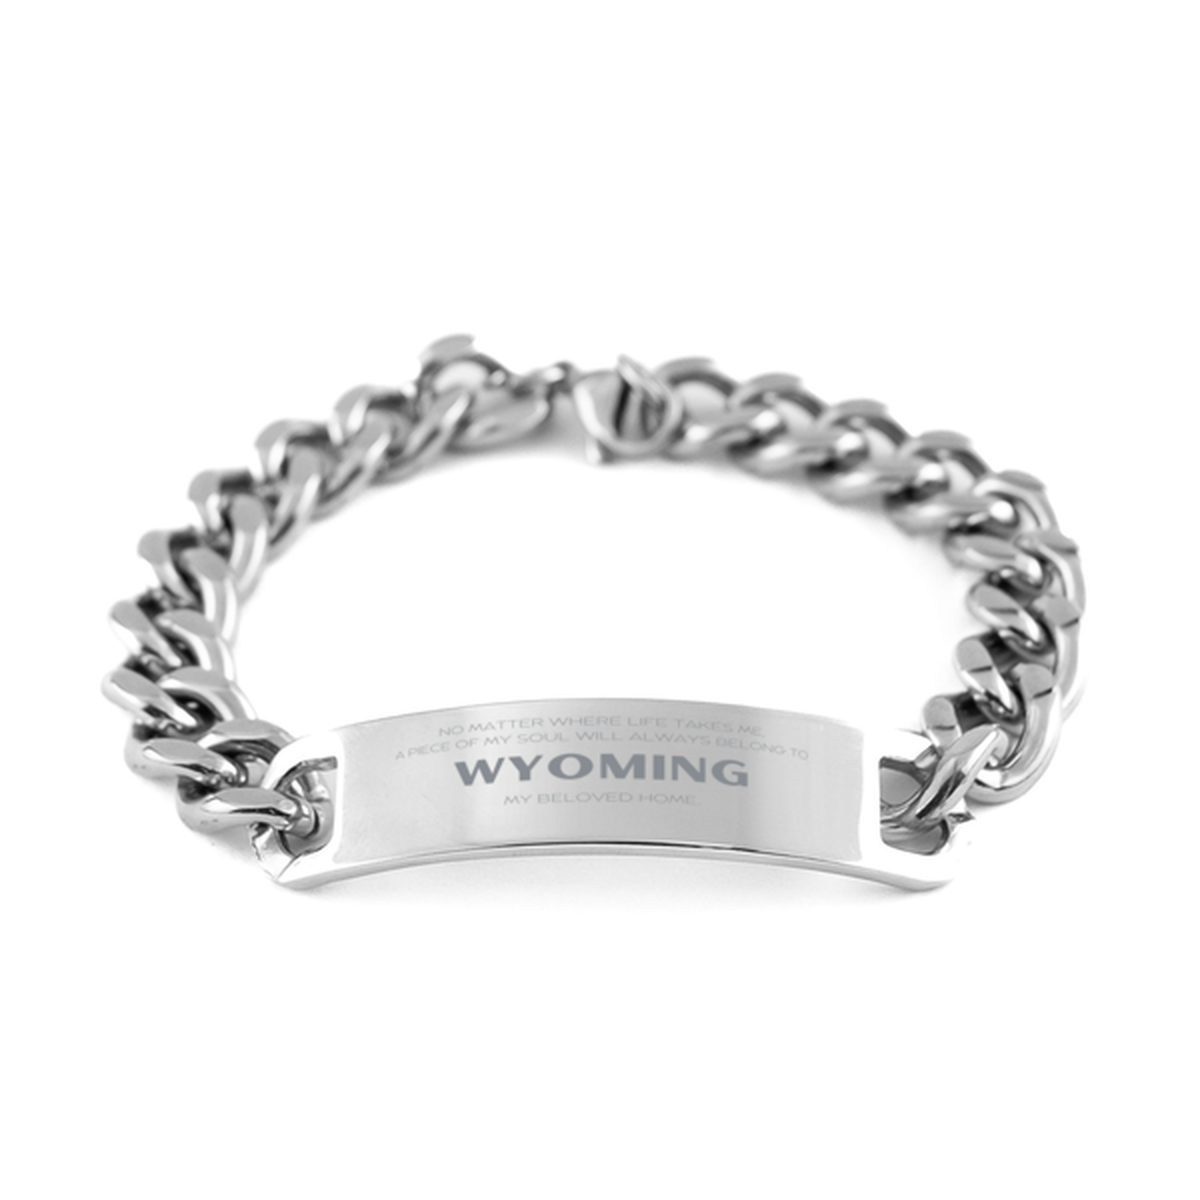 Love Wyoming State Gifts, My soul will always belong to Wyoming, Proud Cuban Chain Stainless Steel Bracelet, Birthday Unique Gifts For Wyoming Men, Women, Friends